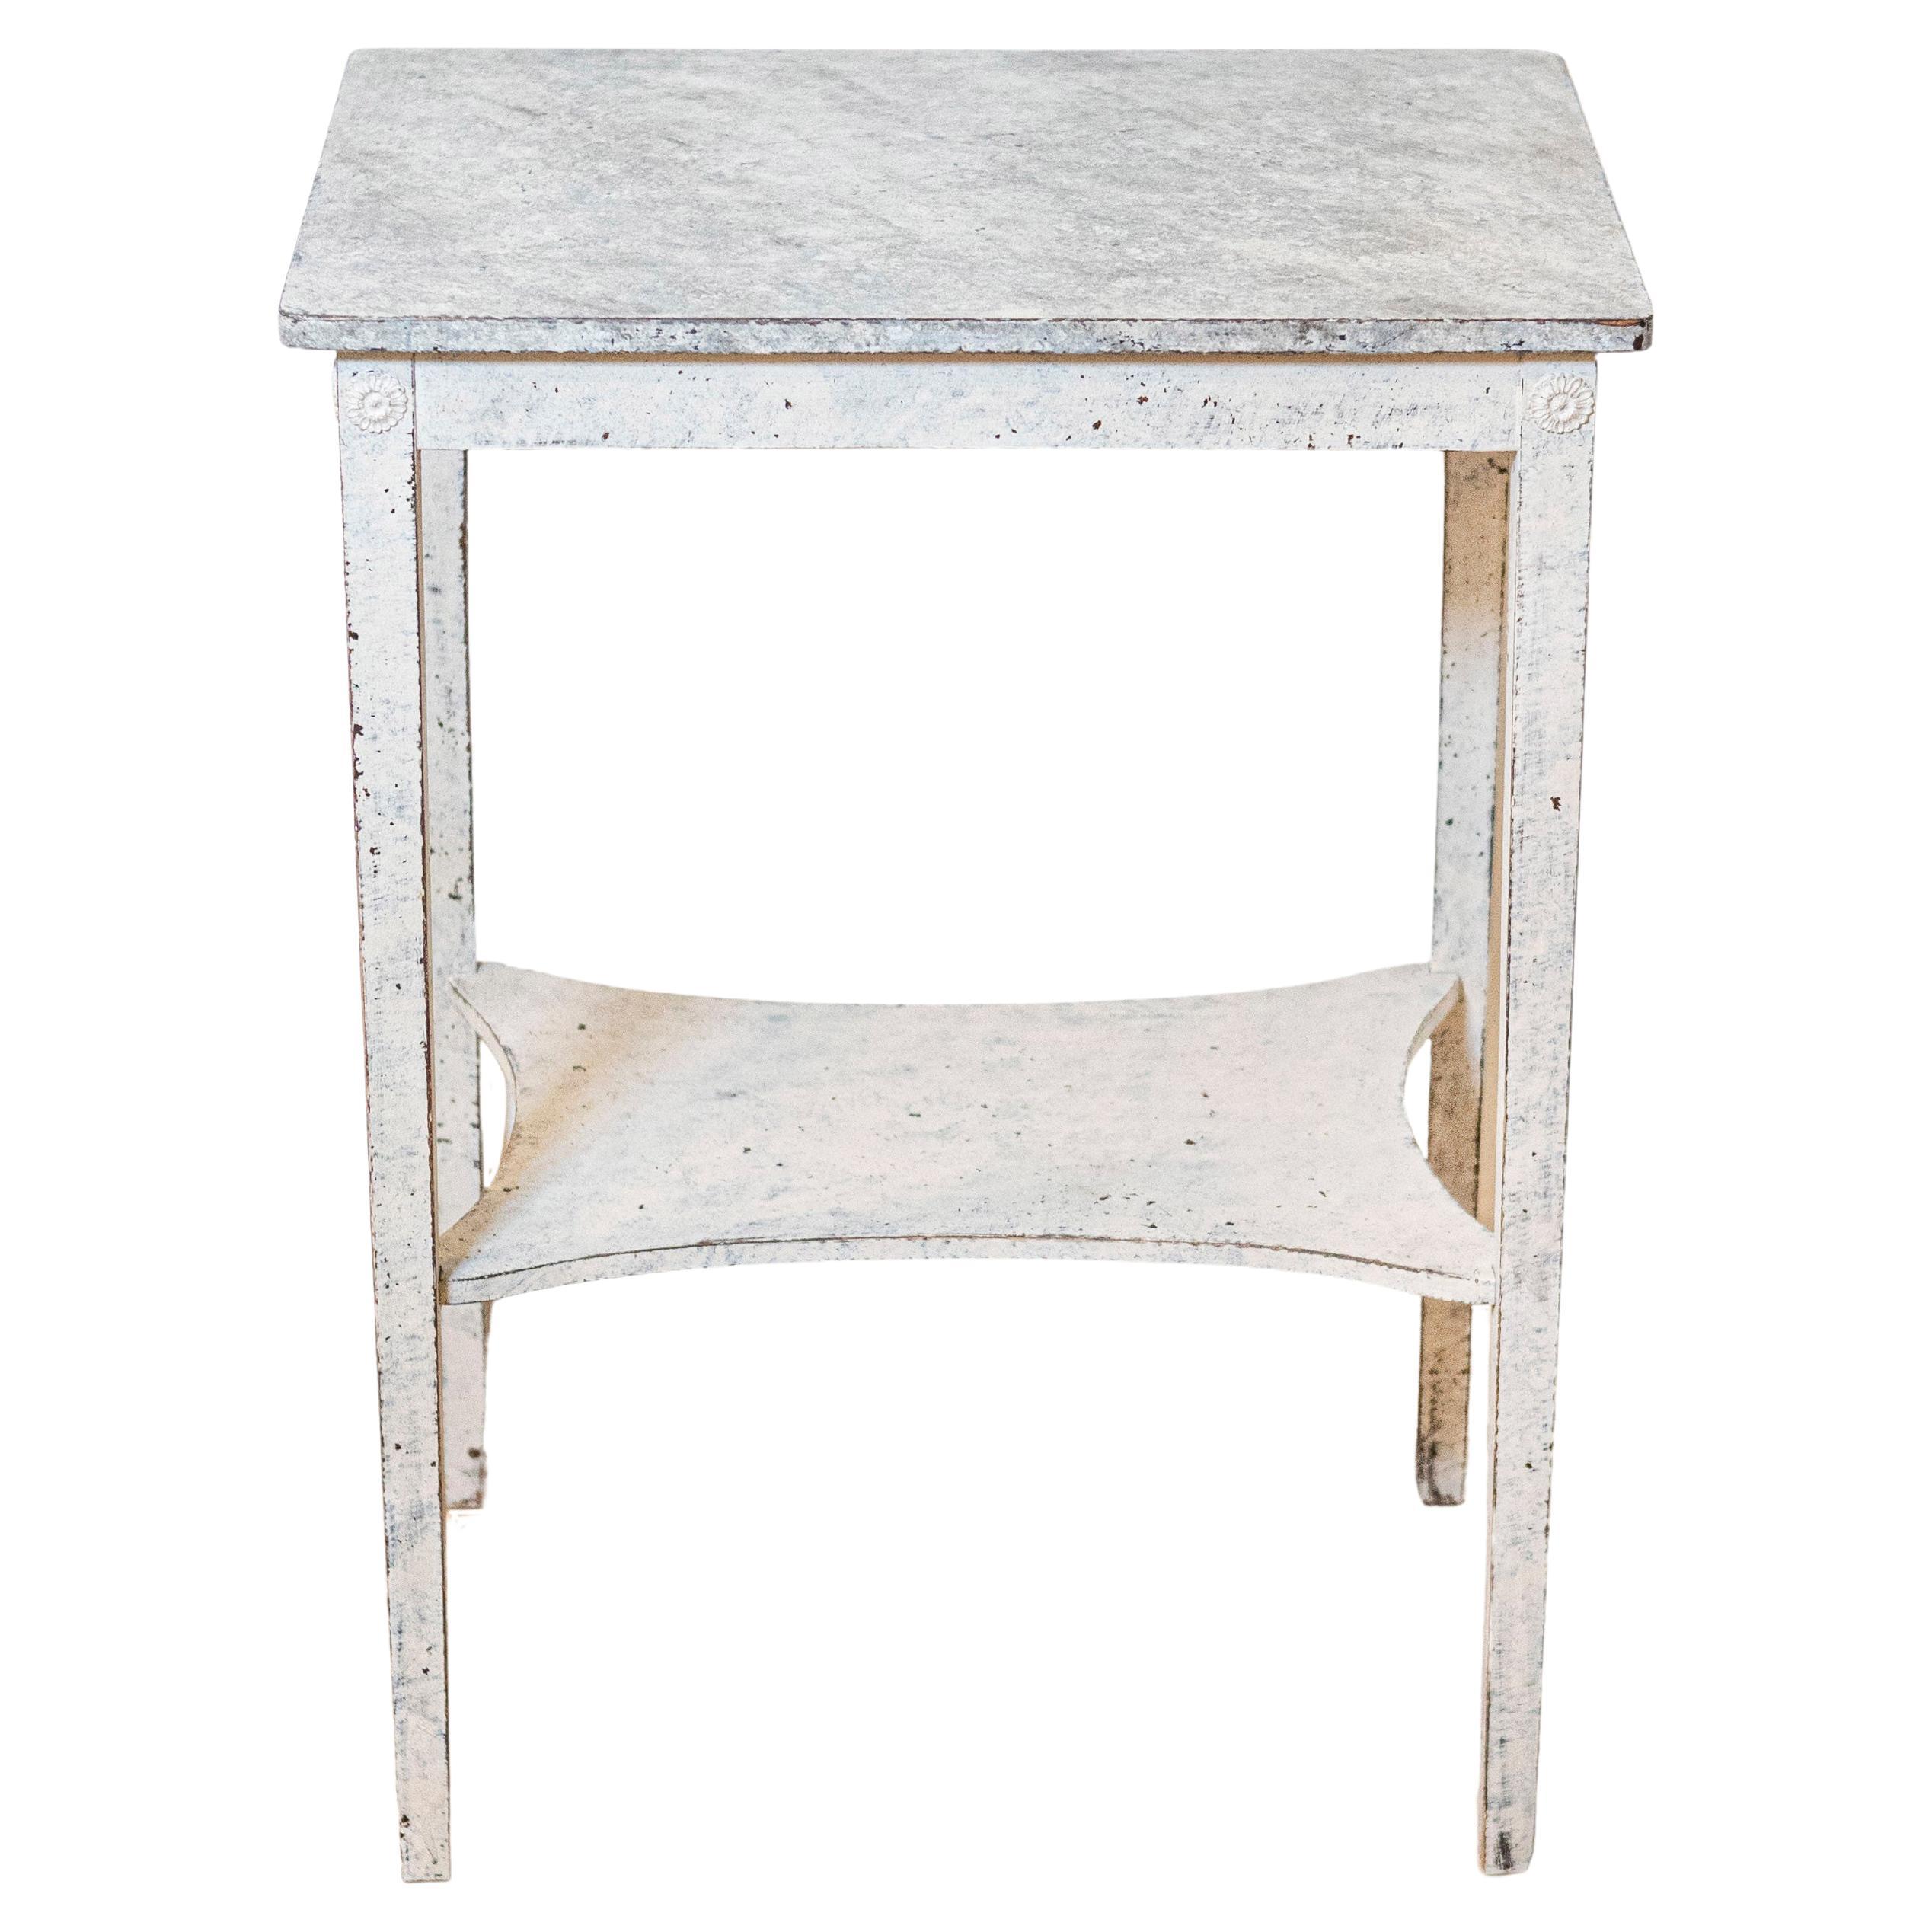 Swedish 19th Century Painted Side Table with Marbleized Top and In-Curving Shelf For Sale